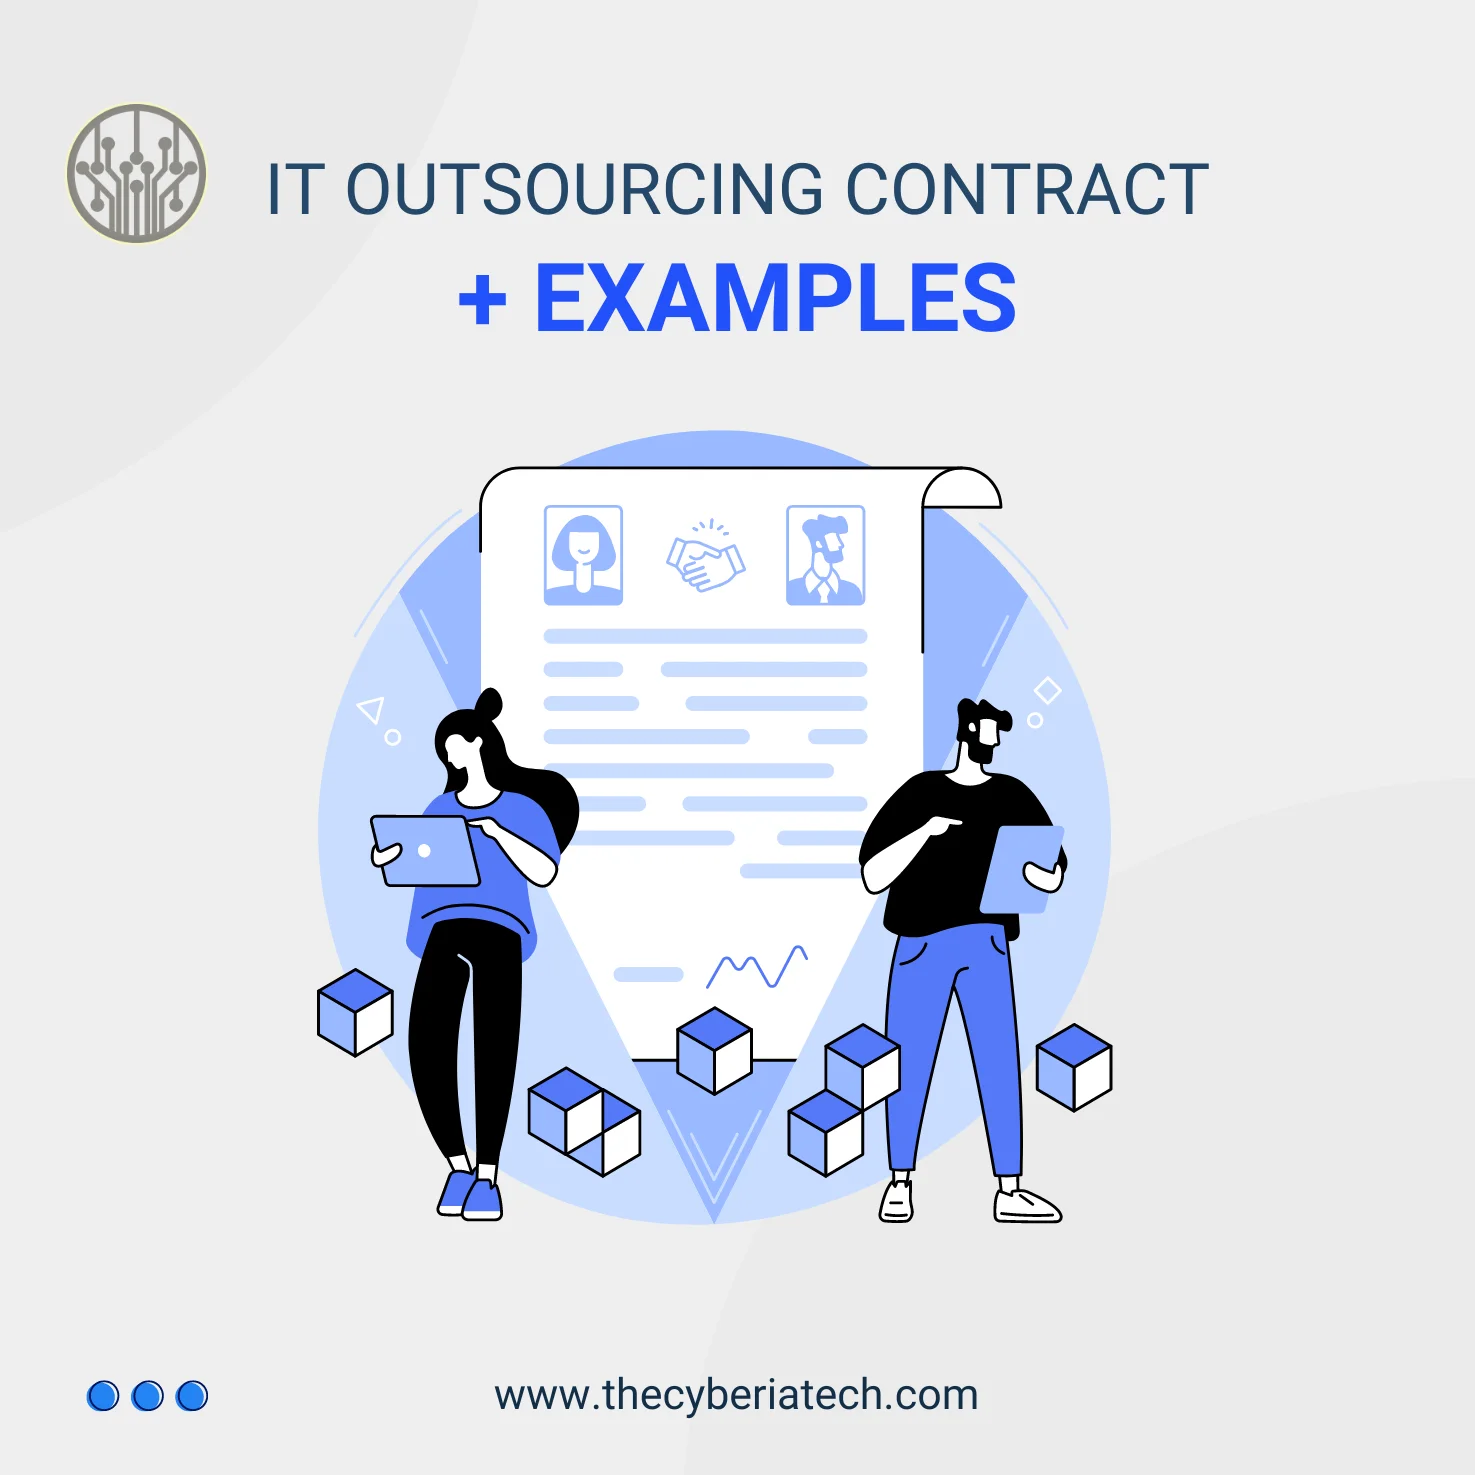 IT outsourcing contract